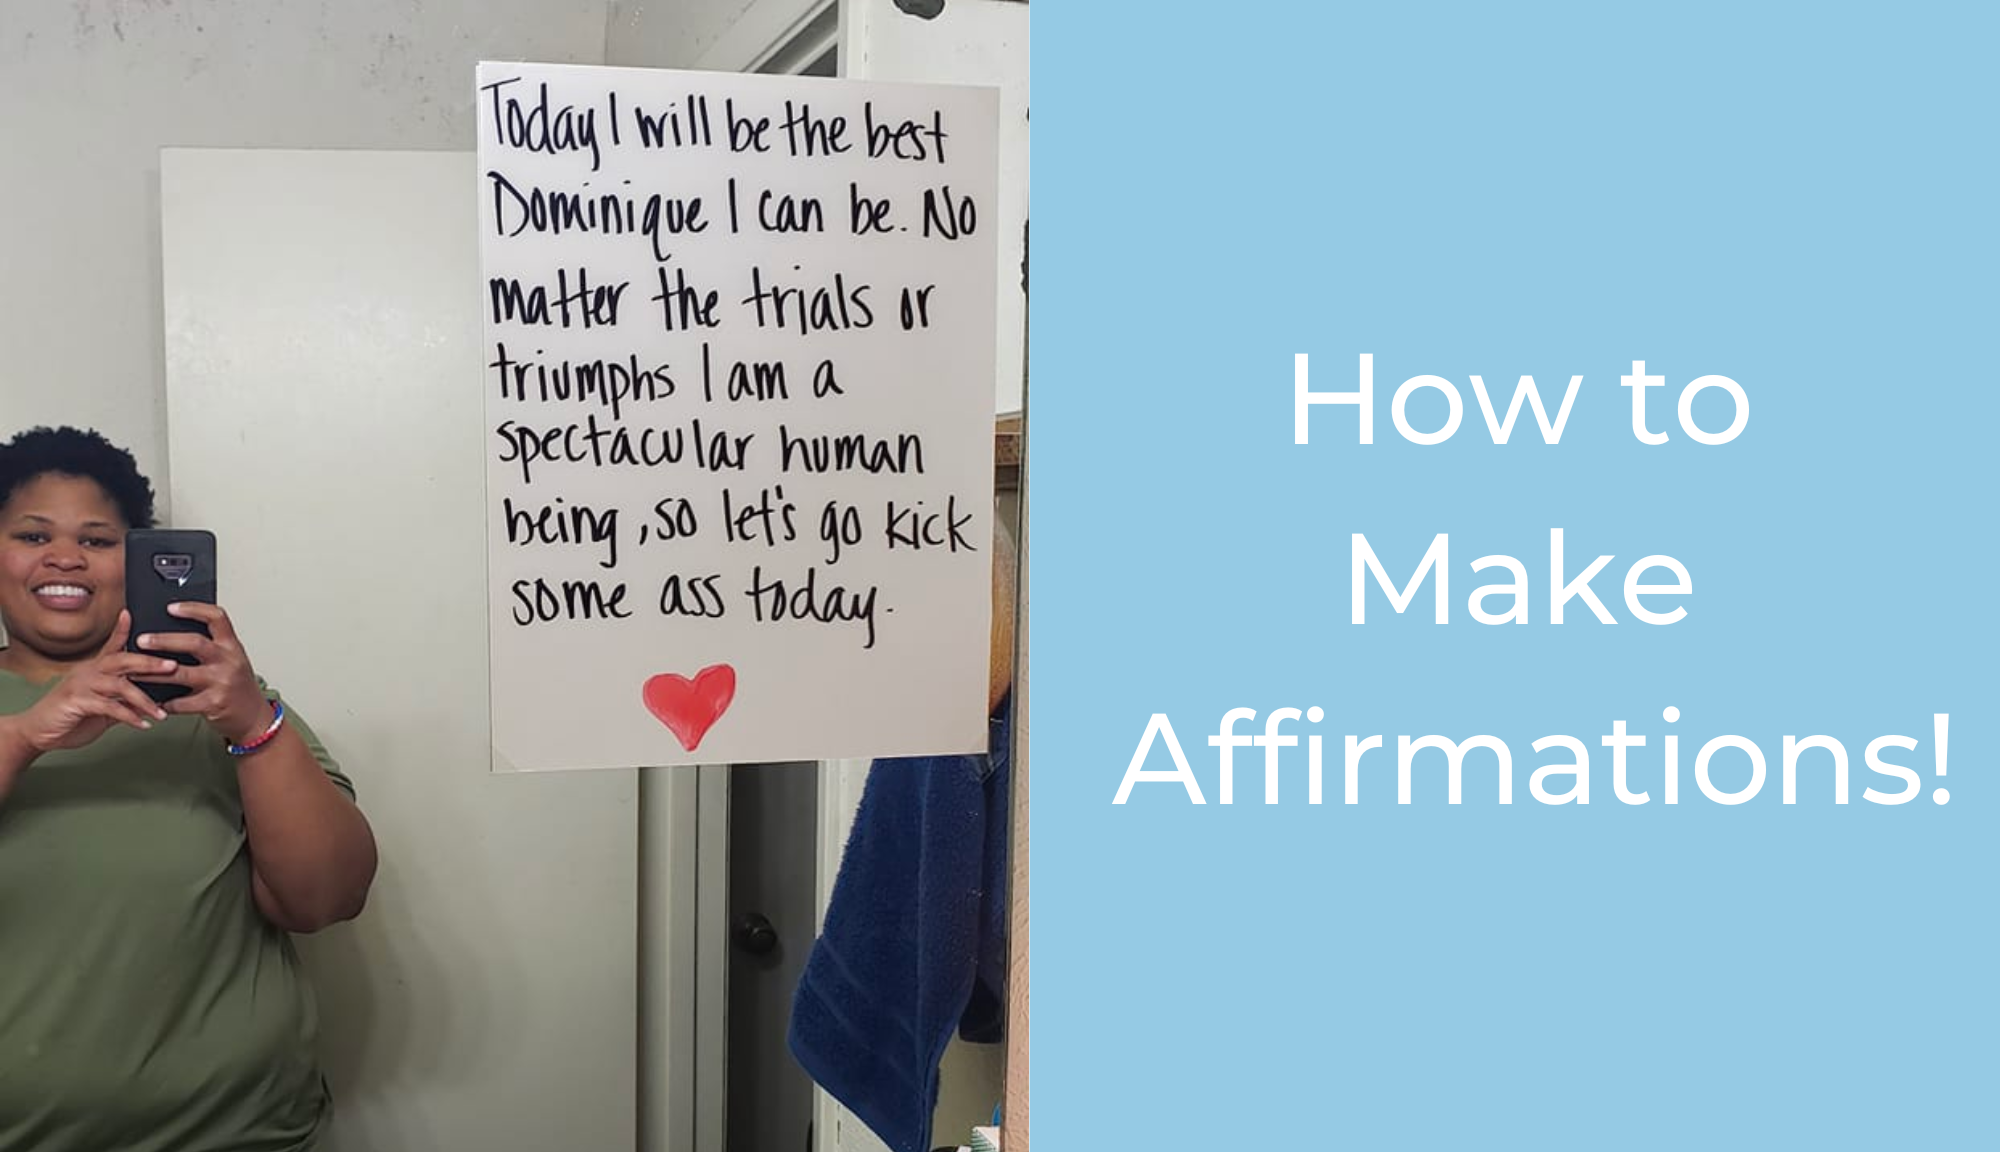 How to Make Affirmations